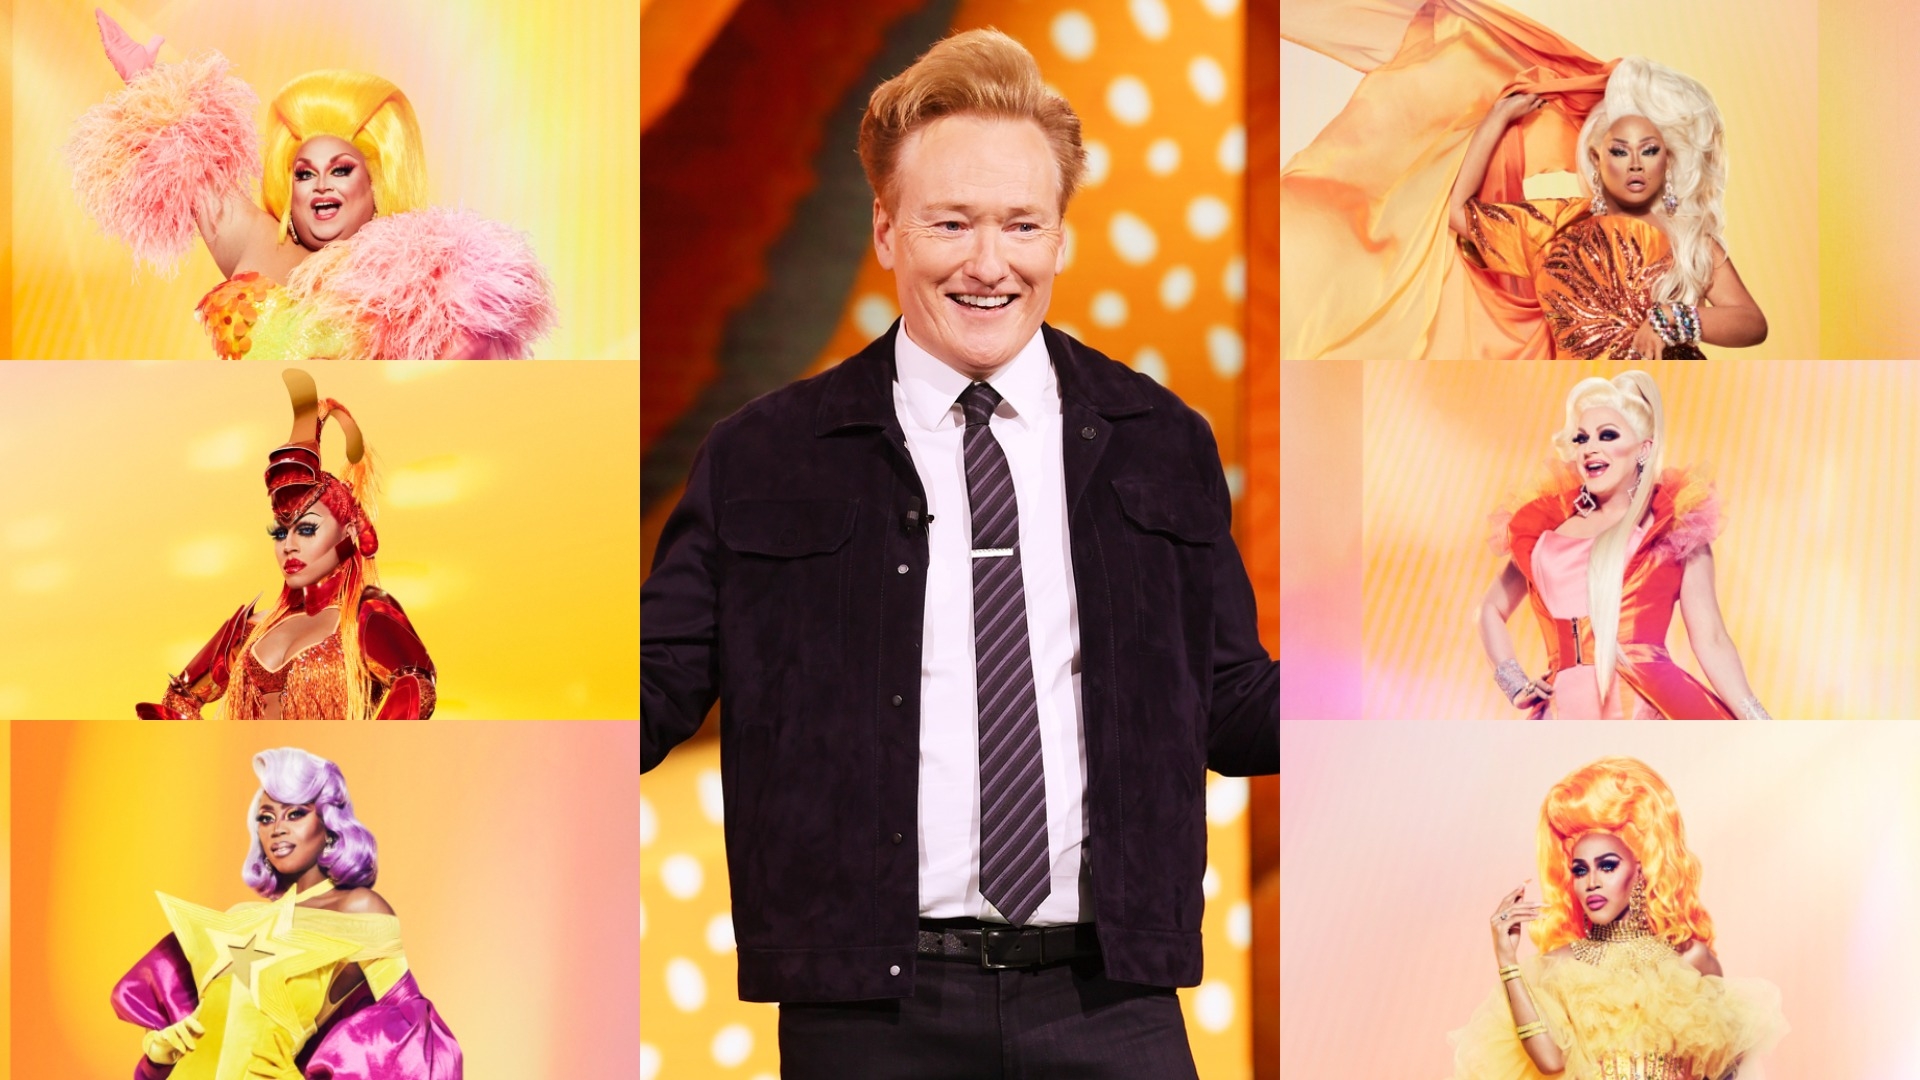 RuPaul brings back her All Stars and TBS bids a fond farewell to Conan